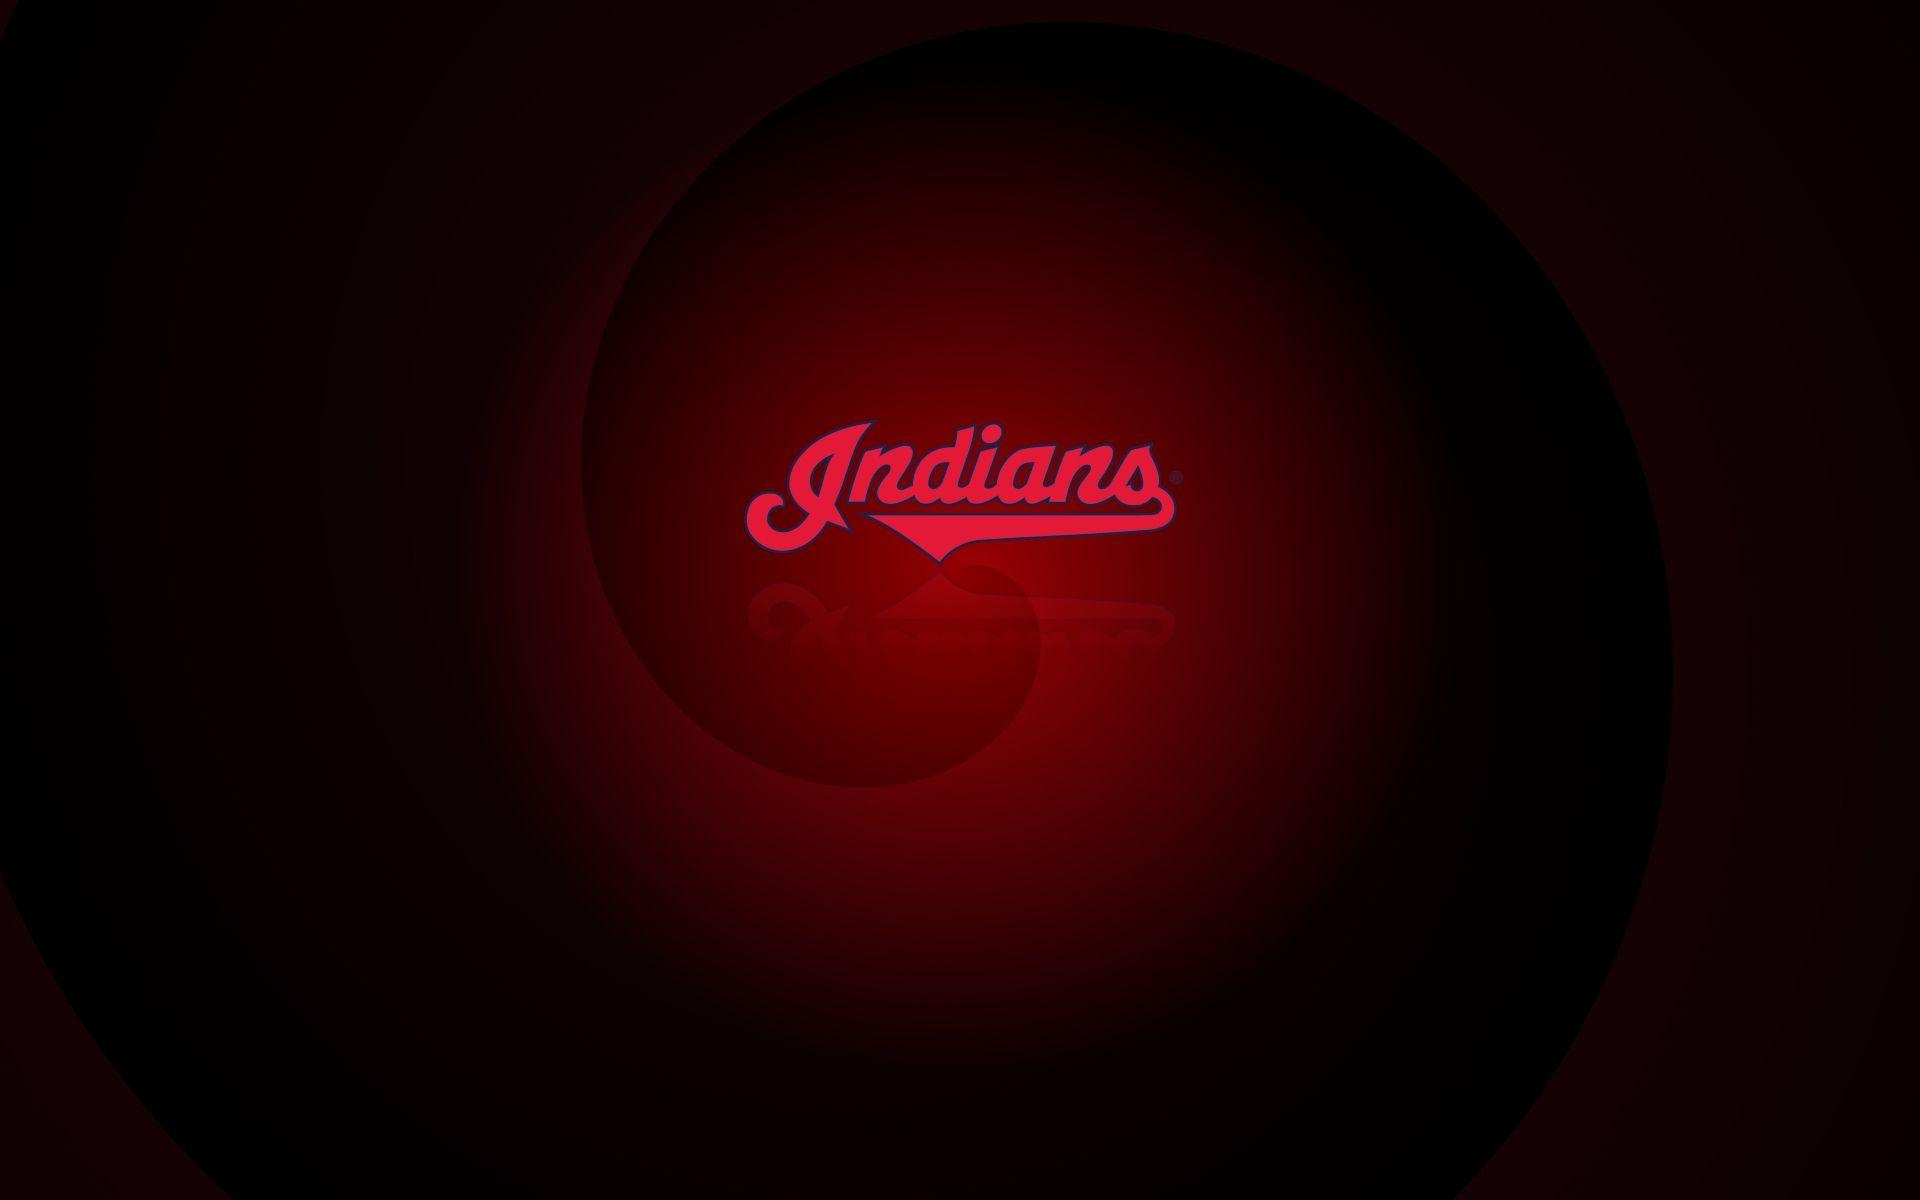 Cleveland Indians Wallpapers Top Free Cleveland Indians Backgrounds Wallpaperaccess